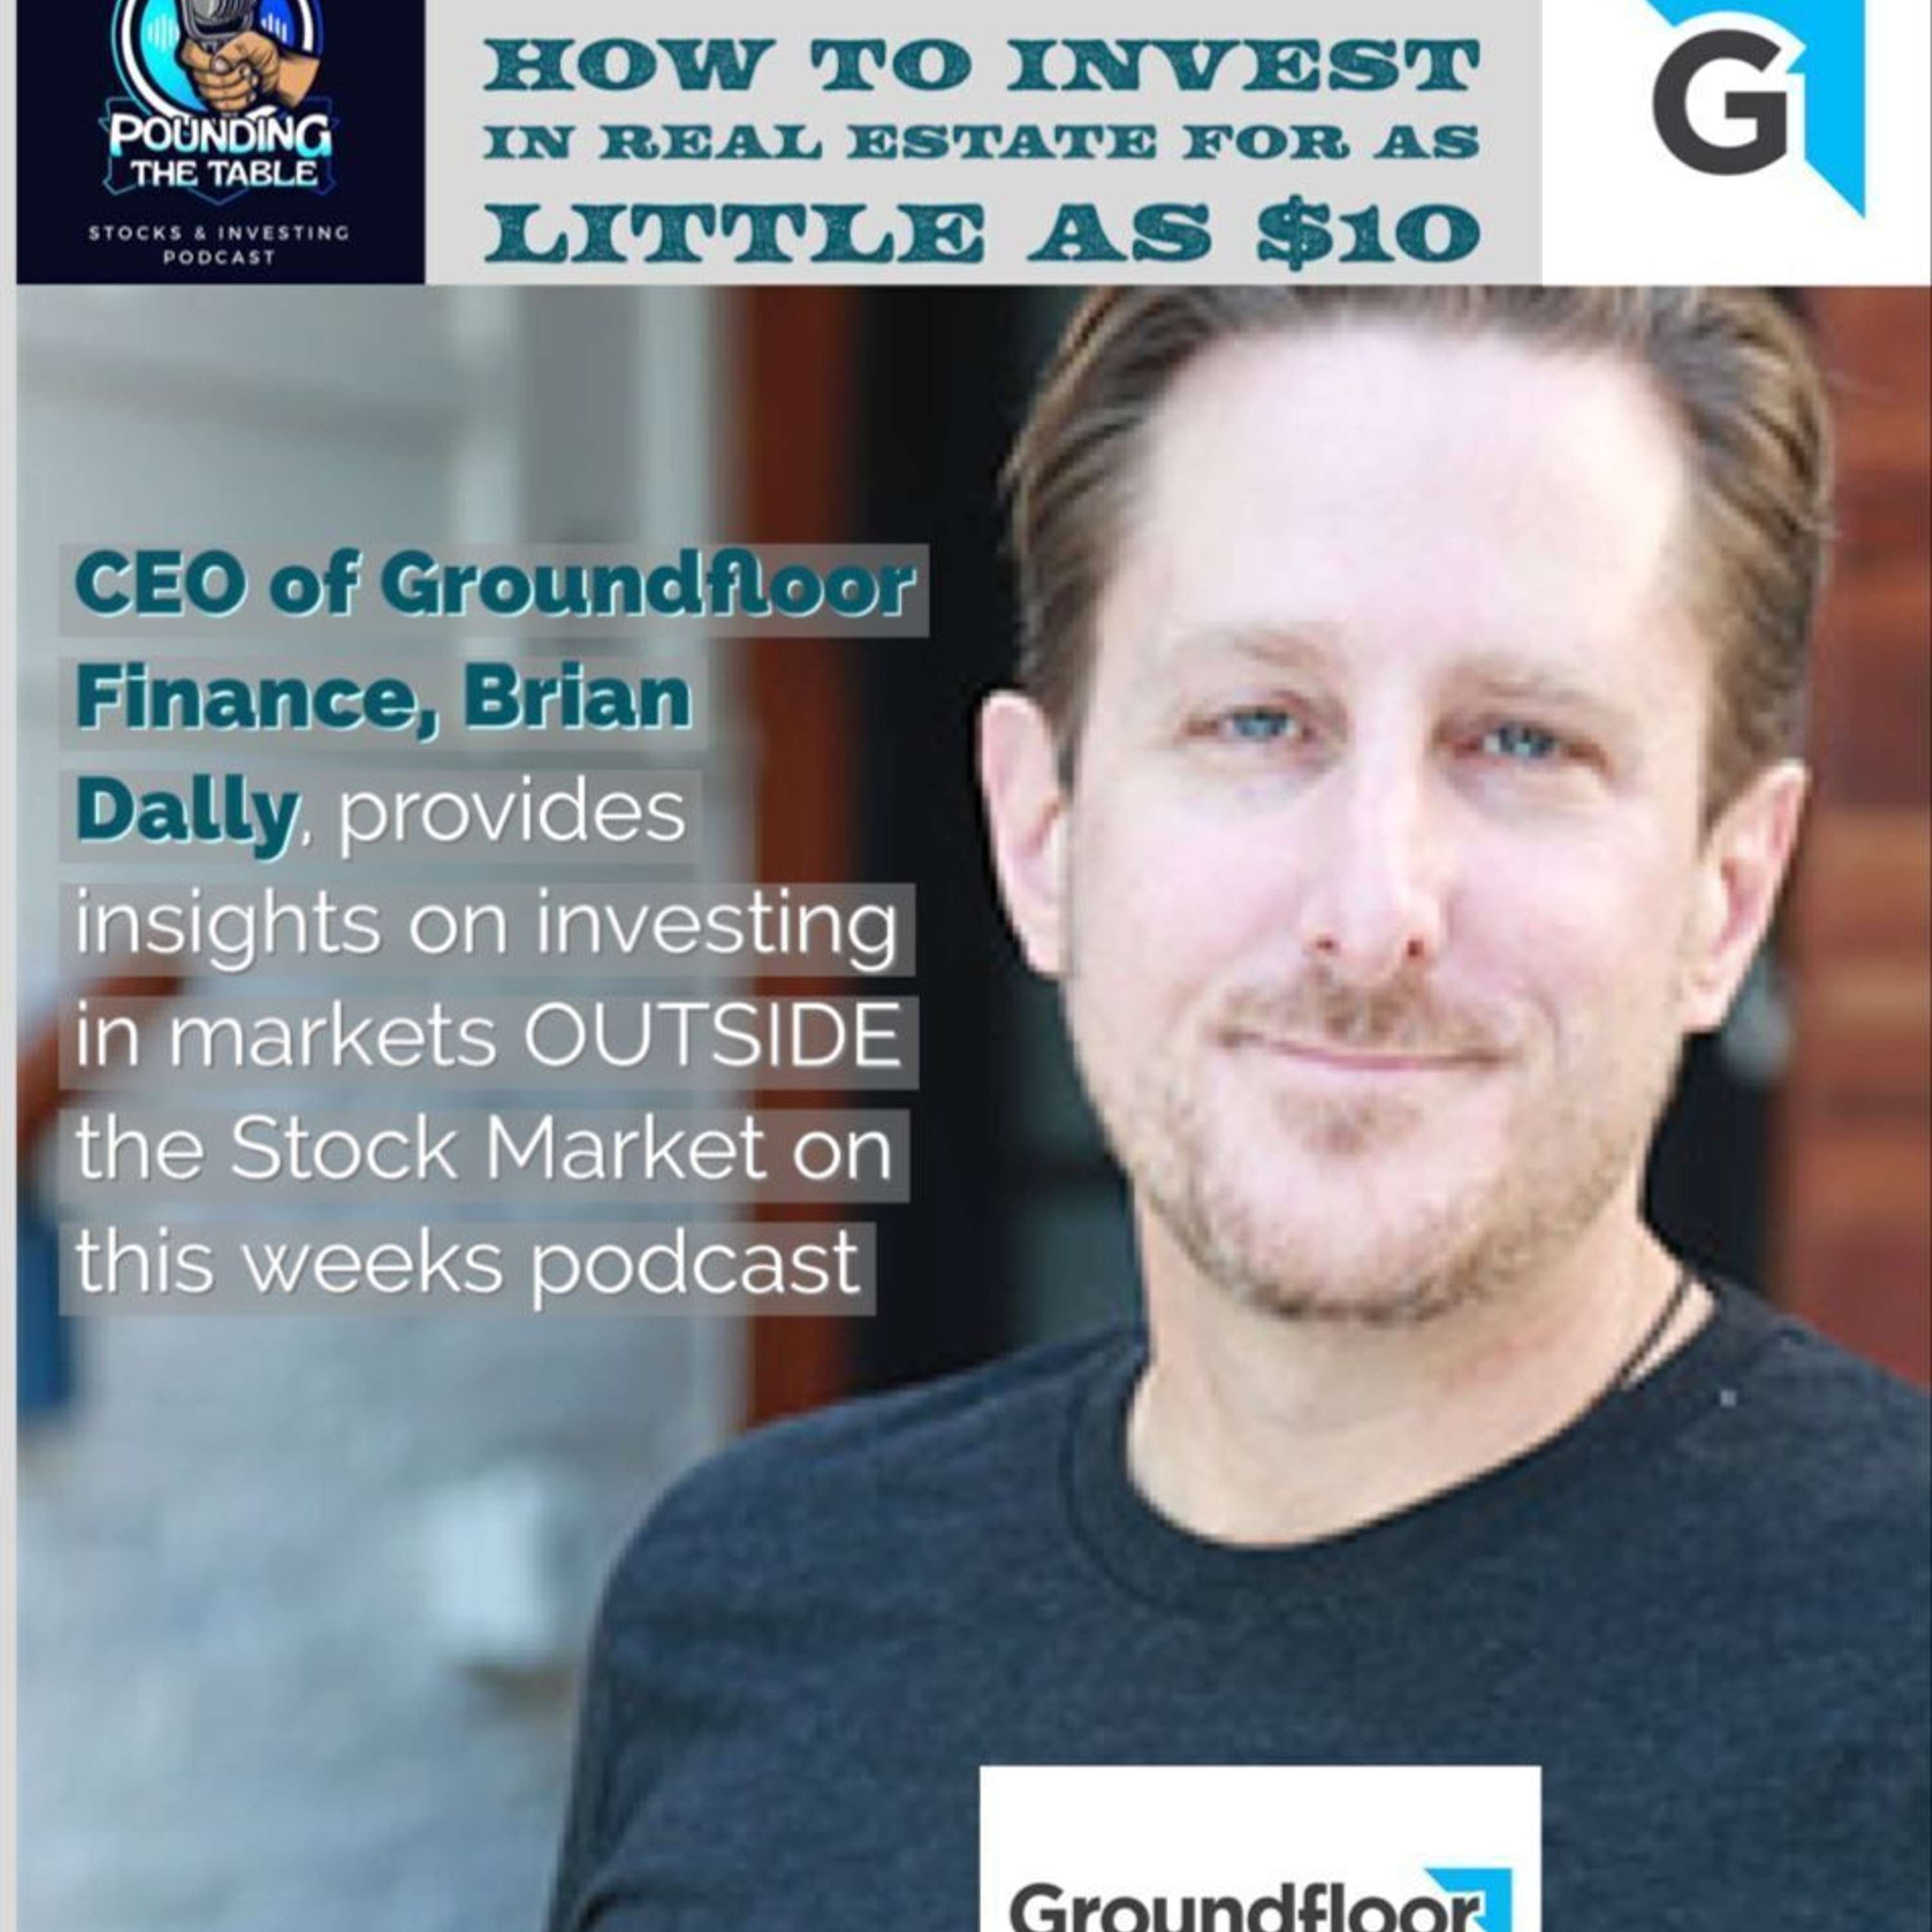 Invest in Real Estate for as little as $10 and Alternative Investments | Interview w/ Groundfloor Finance CEO Interview -